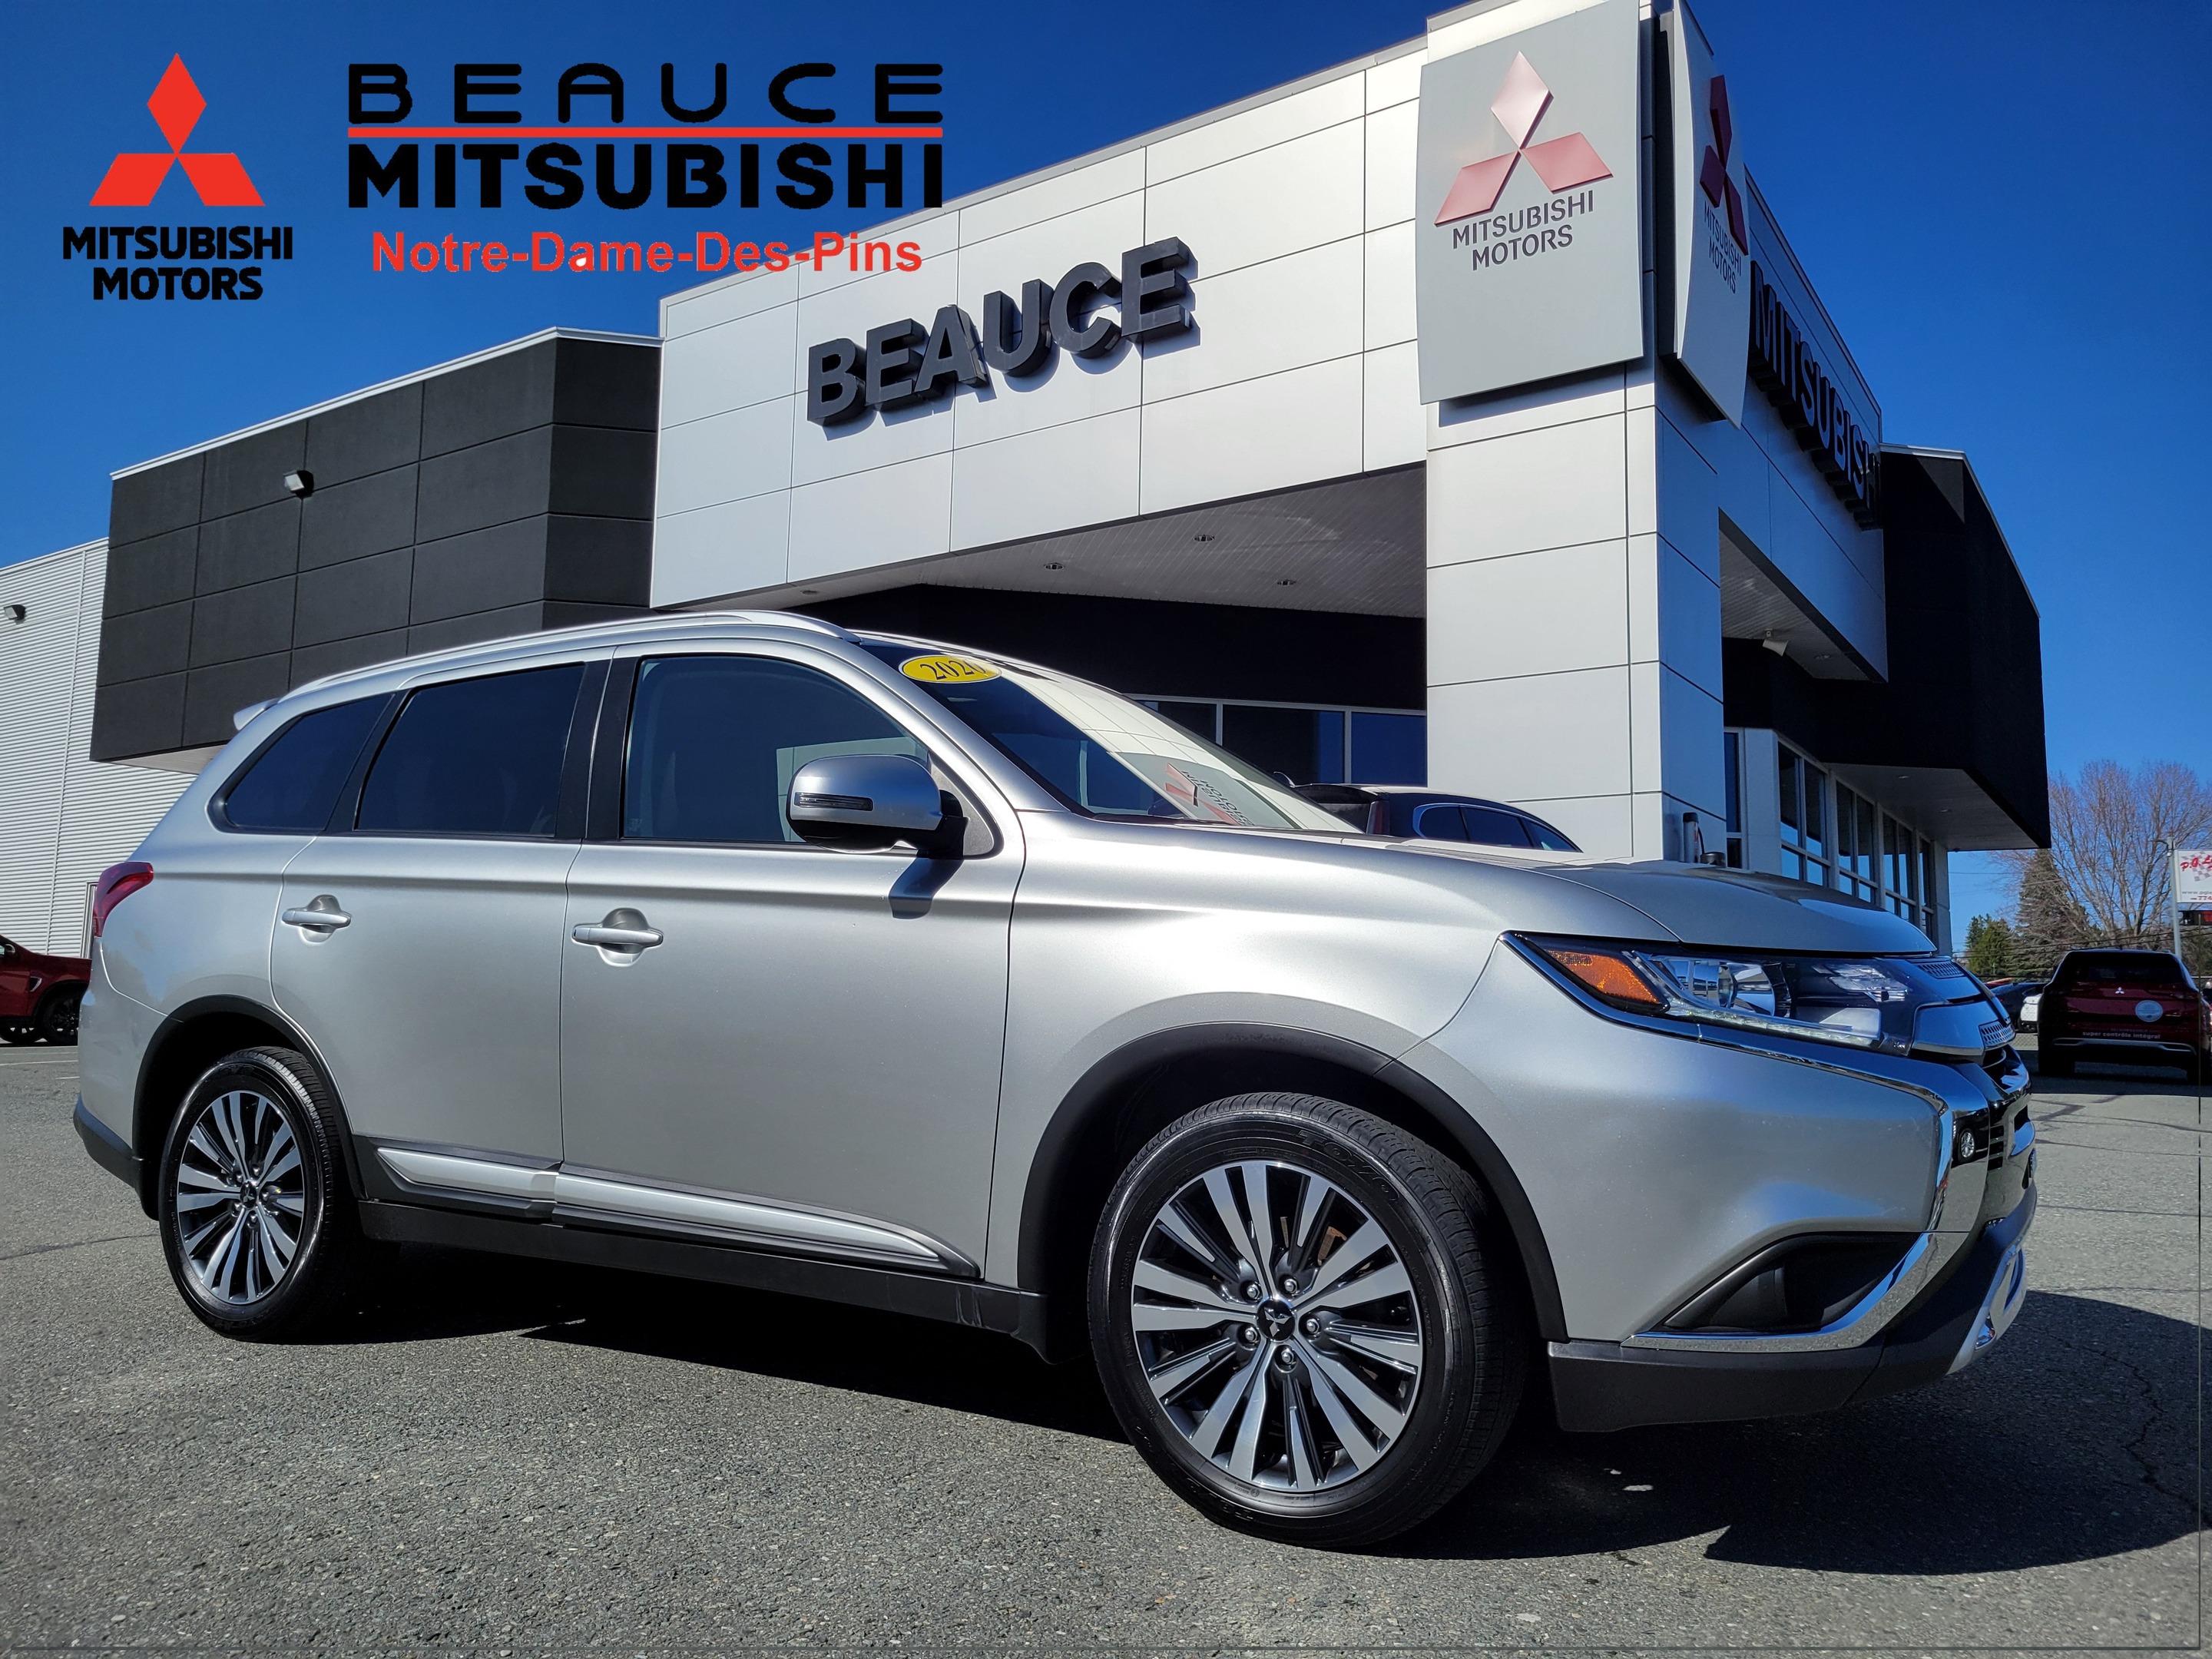 2020 Mitsubishi Outlander EX S-AWC - TOIT - MAG 18' - 7 PASSAGERS - HITCH